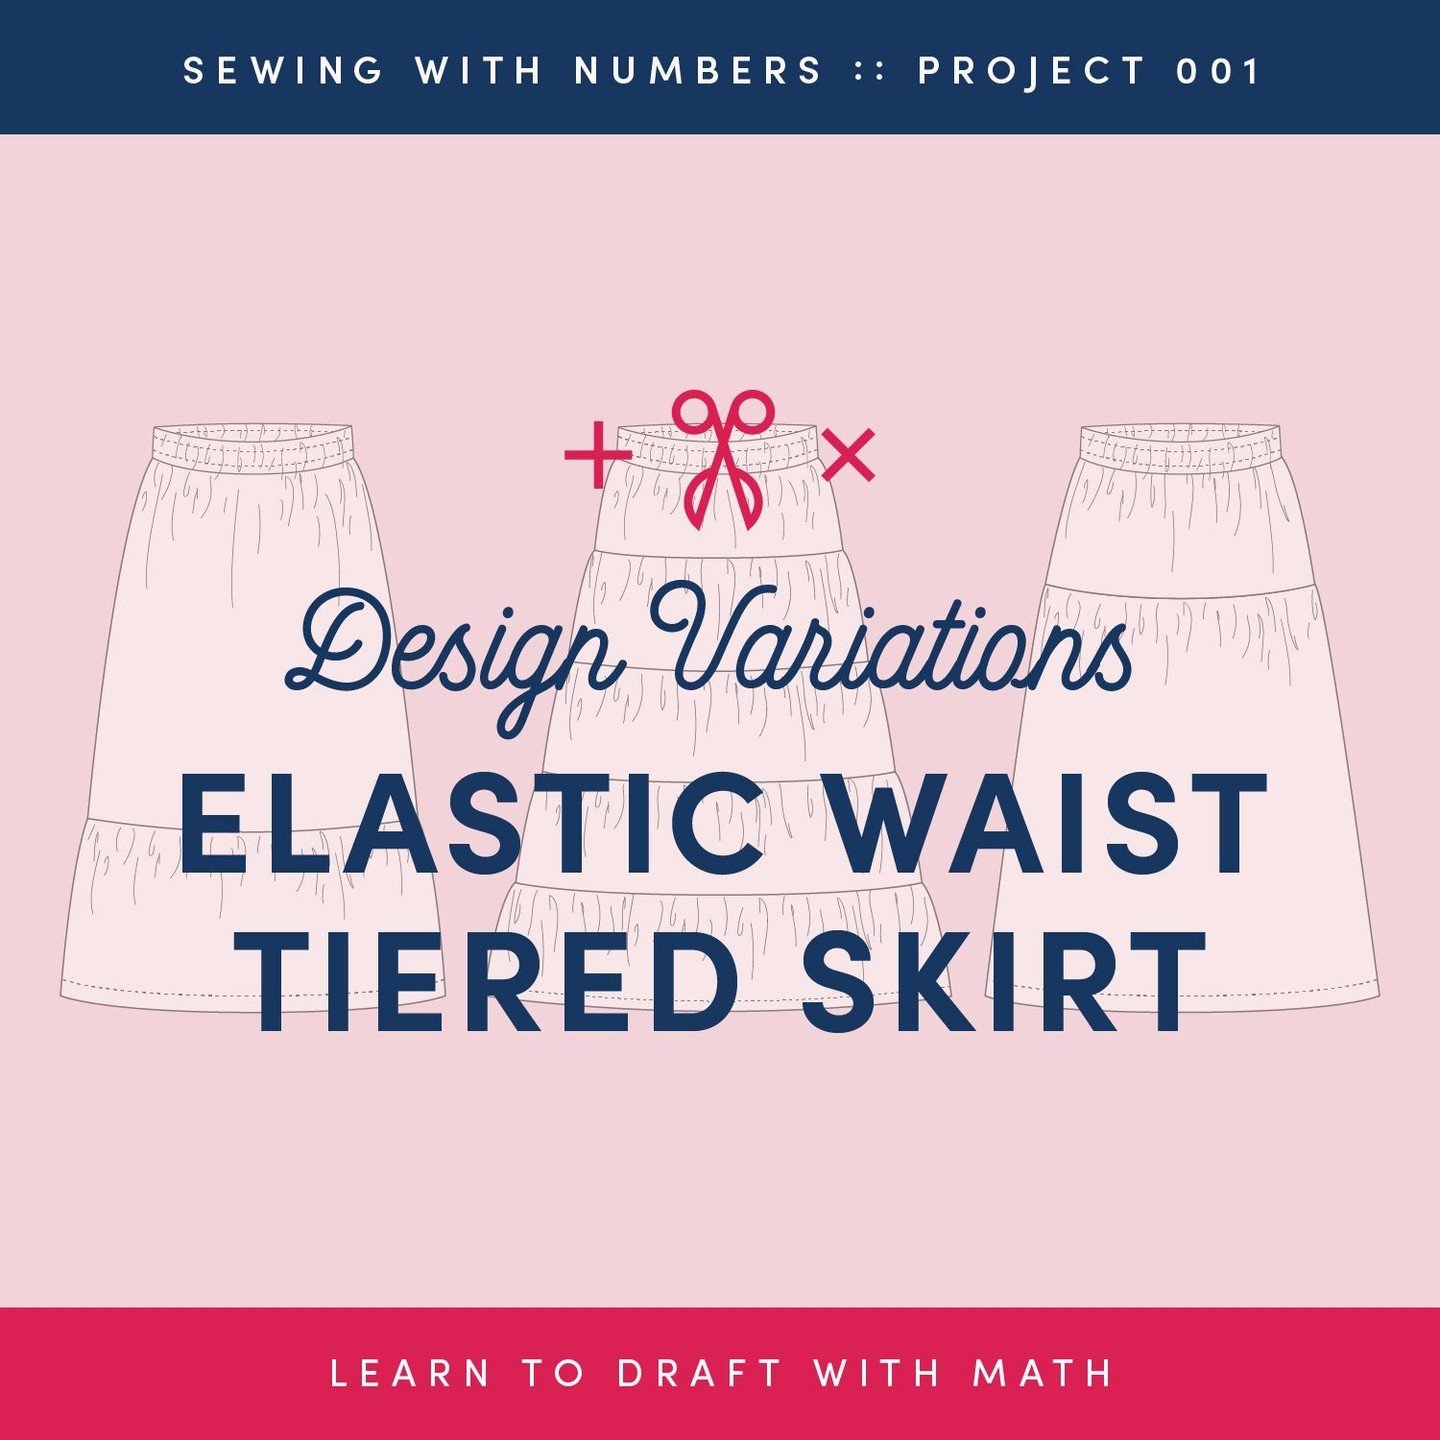 Have you seen the latest issue of Sewing With Numbers? ✖️✂️ ➕ In it, I explore various design proportions for a tiered skirt and show how you can draft it to match any finished length you want. 🤗 
✨ 
Sewing With Numbers is a newsletter hosted on Sub